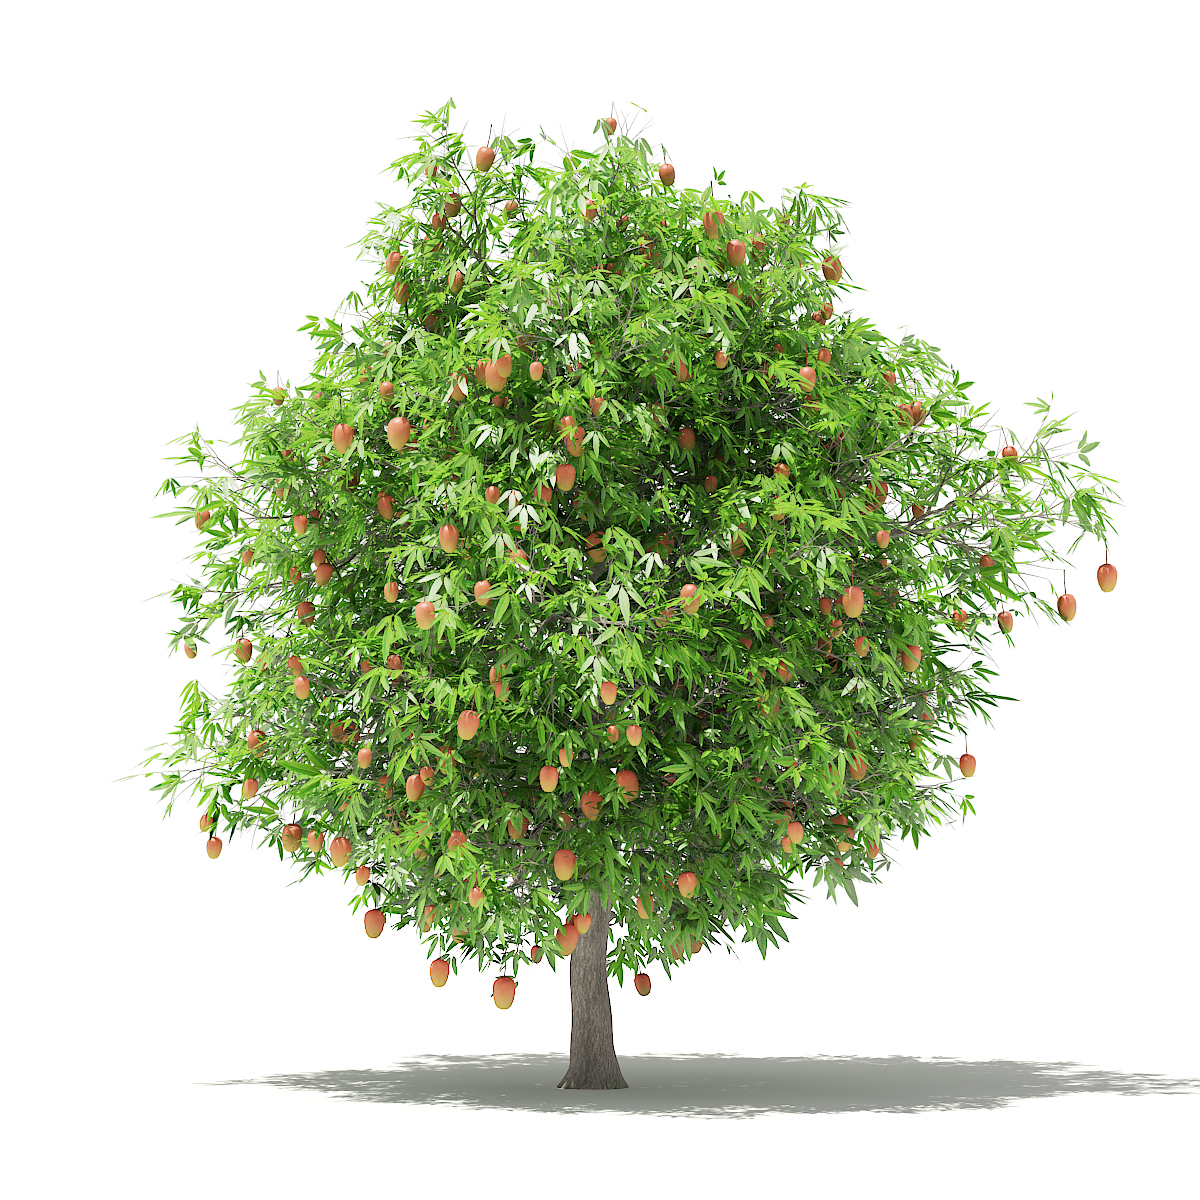 Mango Tree With Fruits 3d Model 4m By Cgaxis 3docean